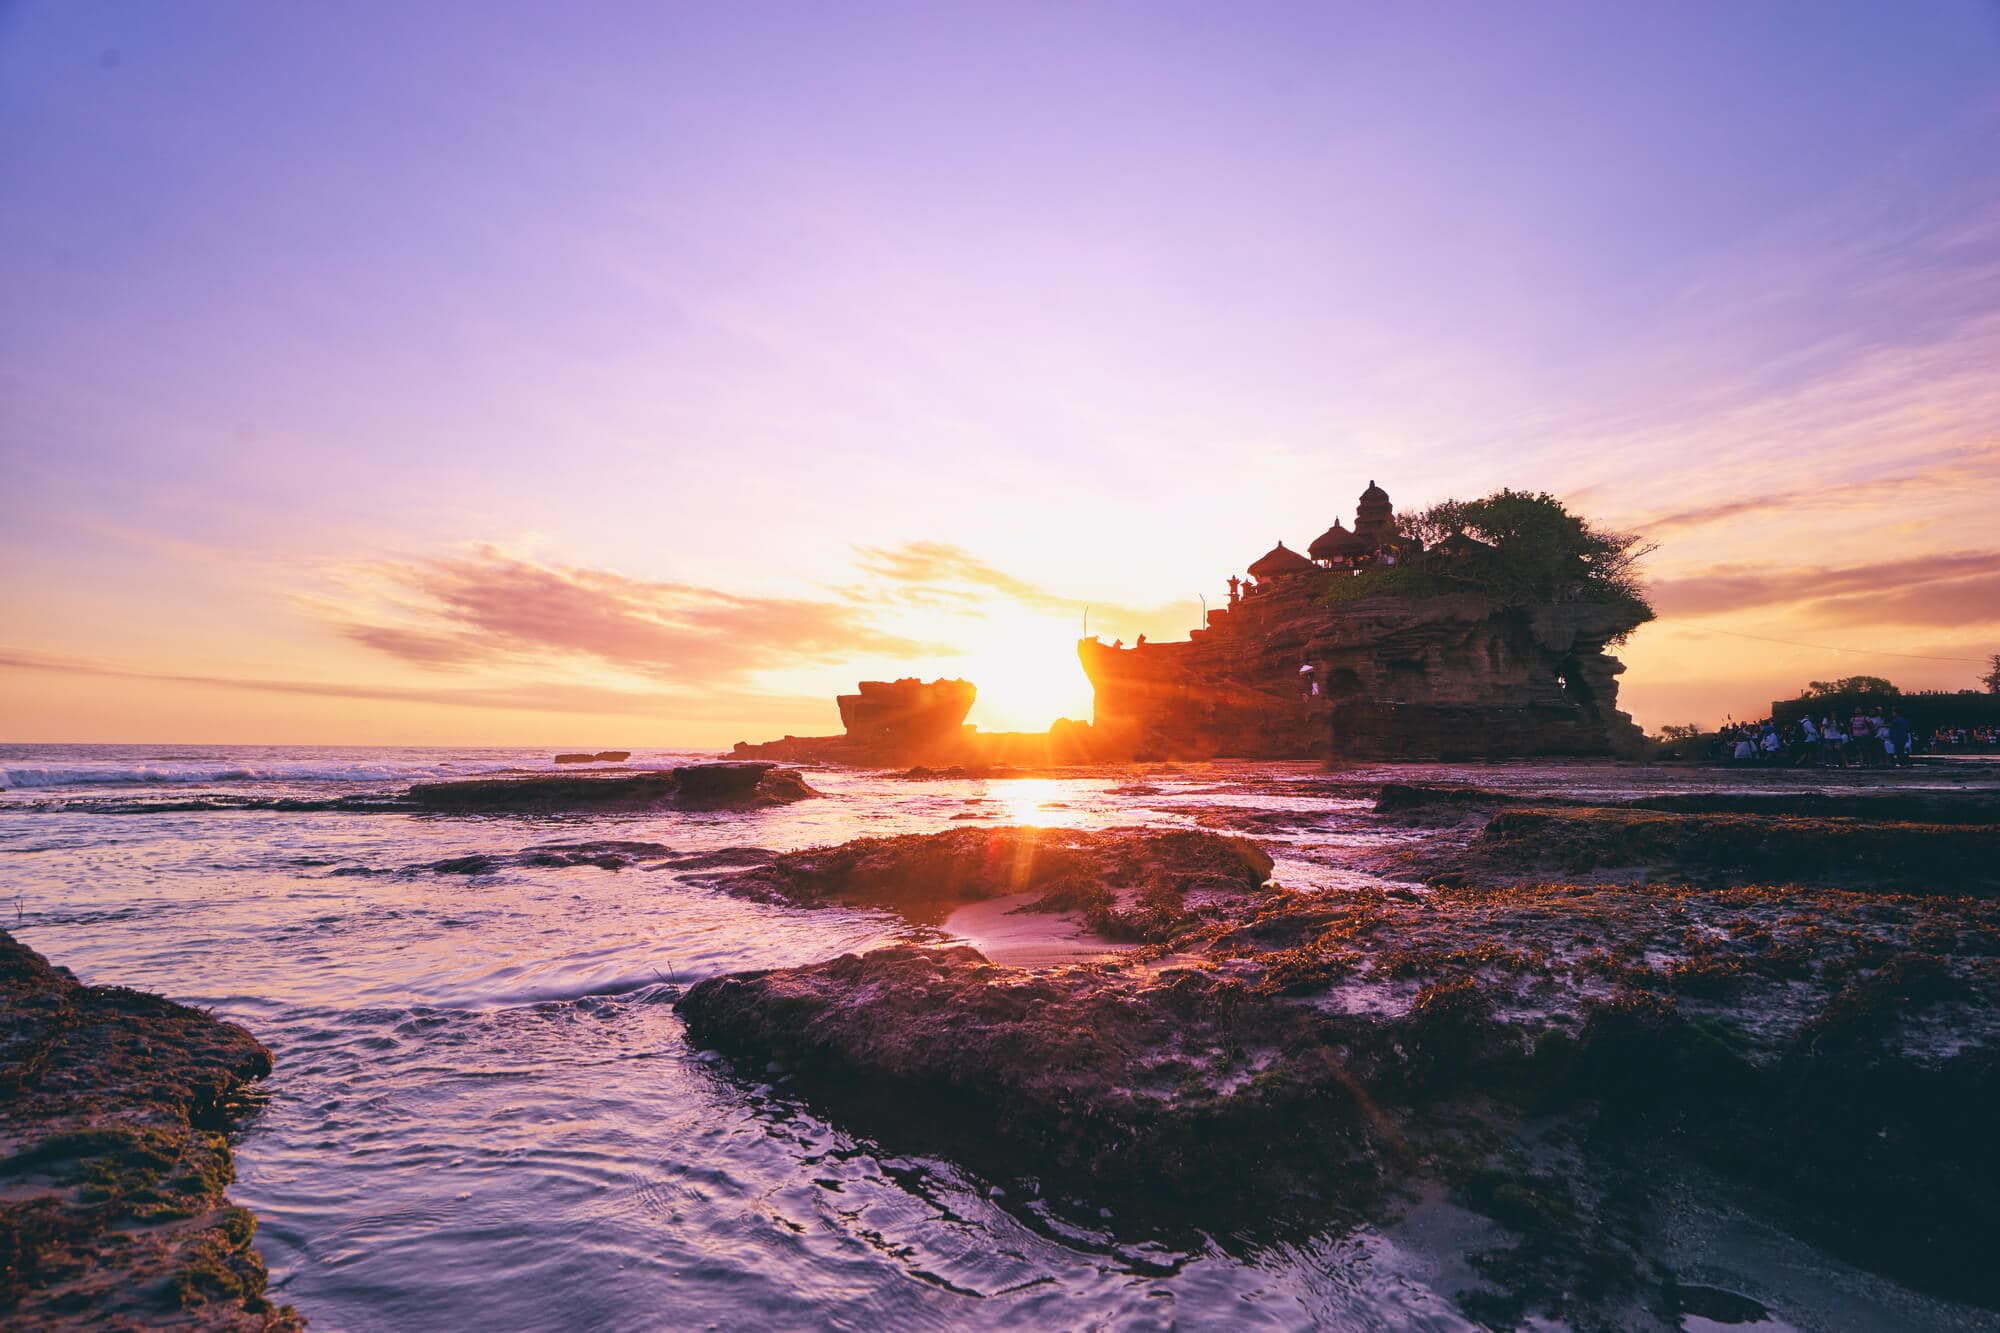 Sunset over Tanah Lot Temple - 13 things not to do in Bali